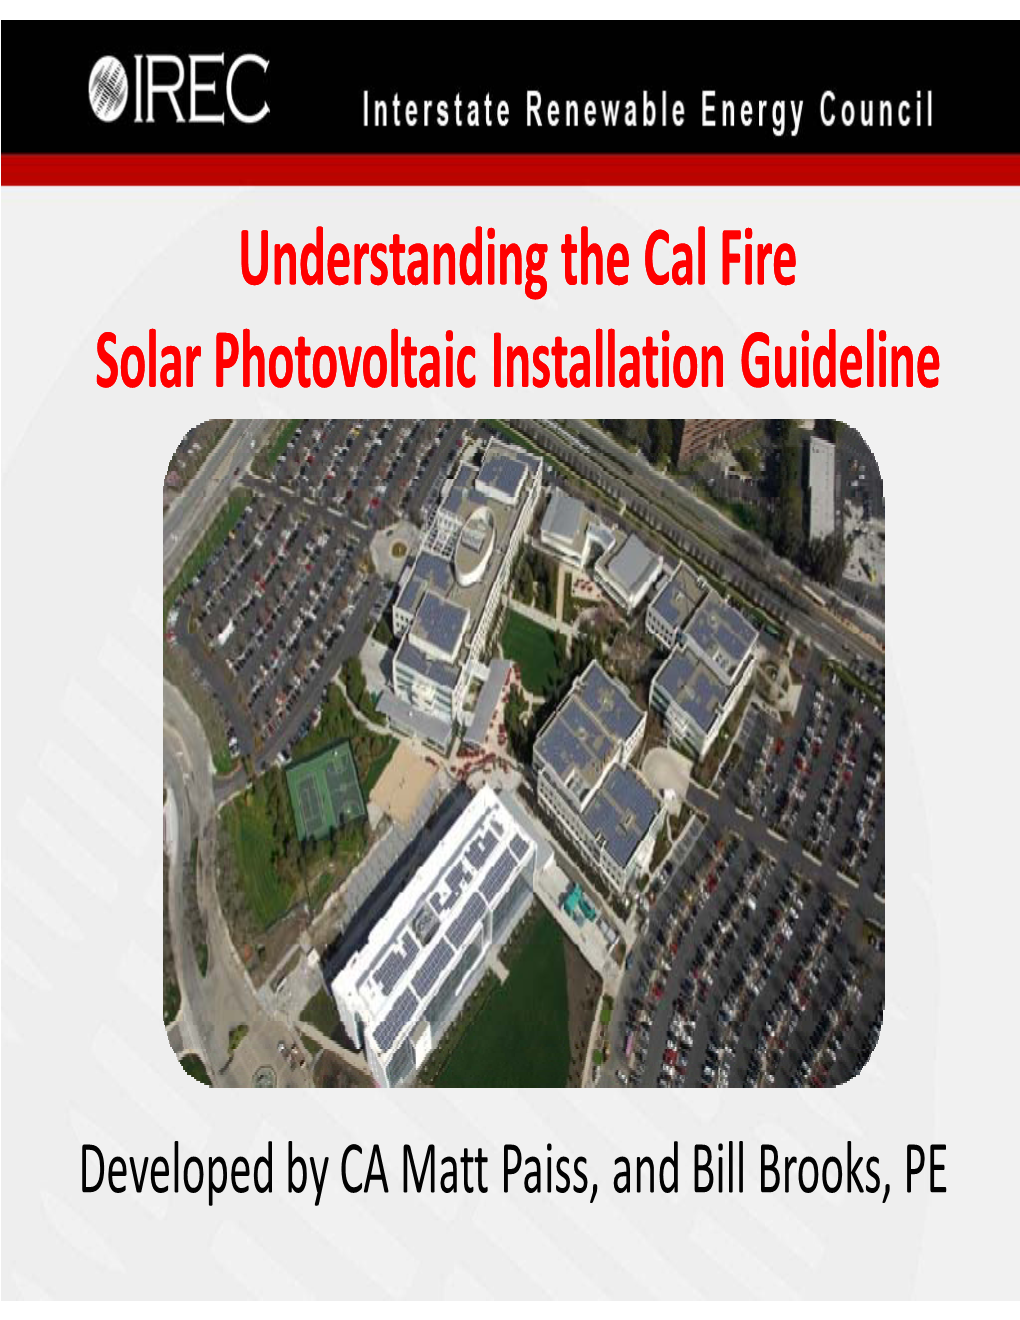 Understanding the Cal Fire Solar Photovoltaic Installation Guideline